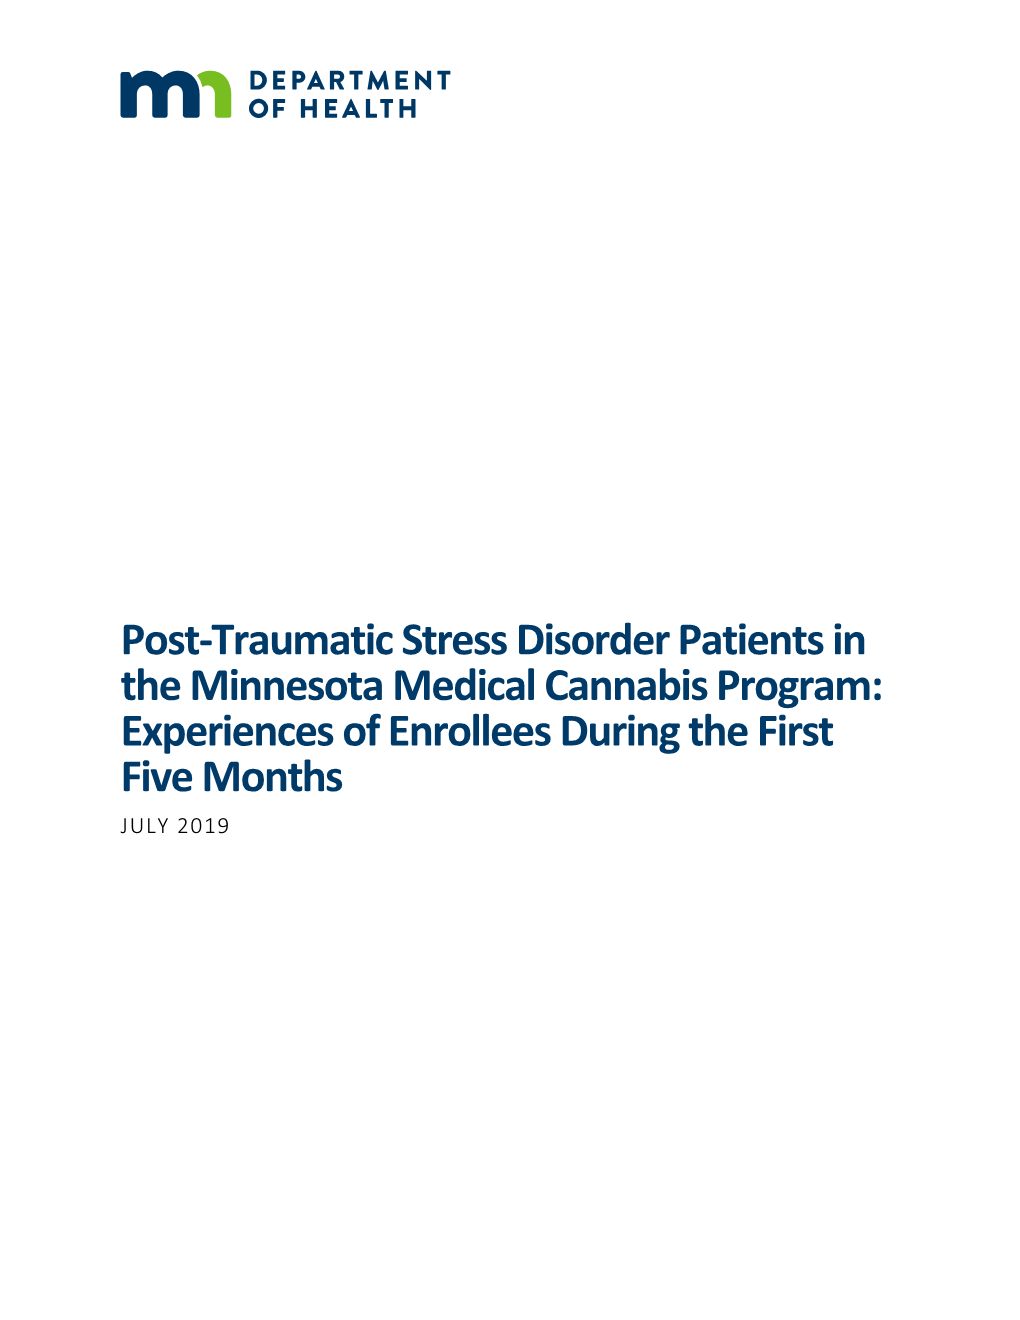 Post-Traumatic Stress Disorder Patients in the Minnesota Medical Cannabis Program: Experiences of Enrollees During the First Five Months JULY 2019